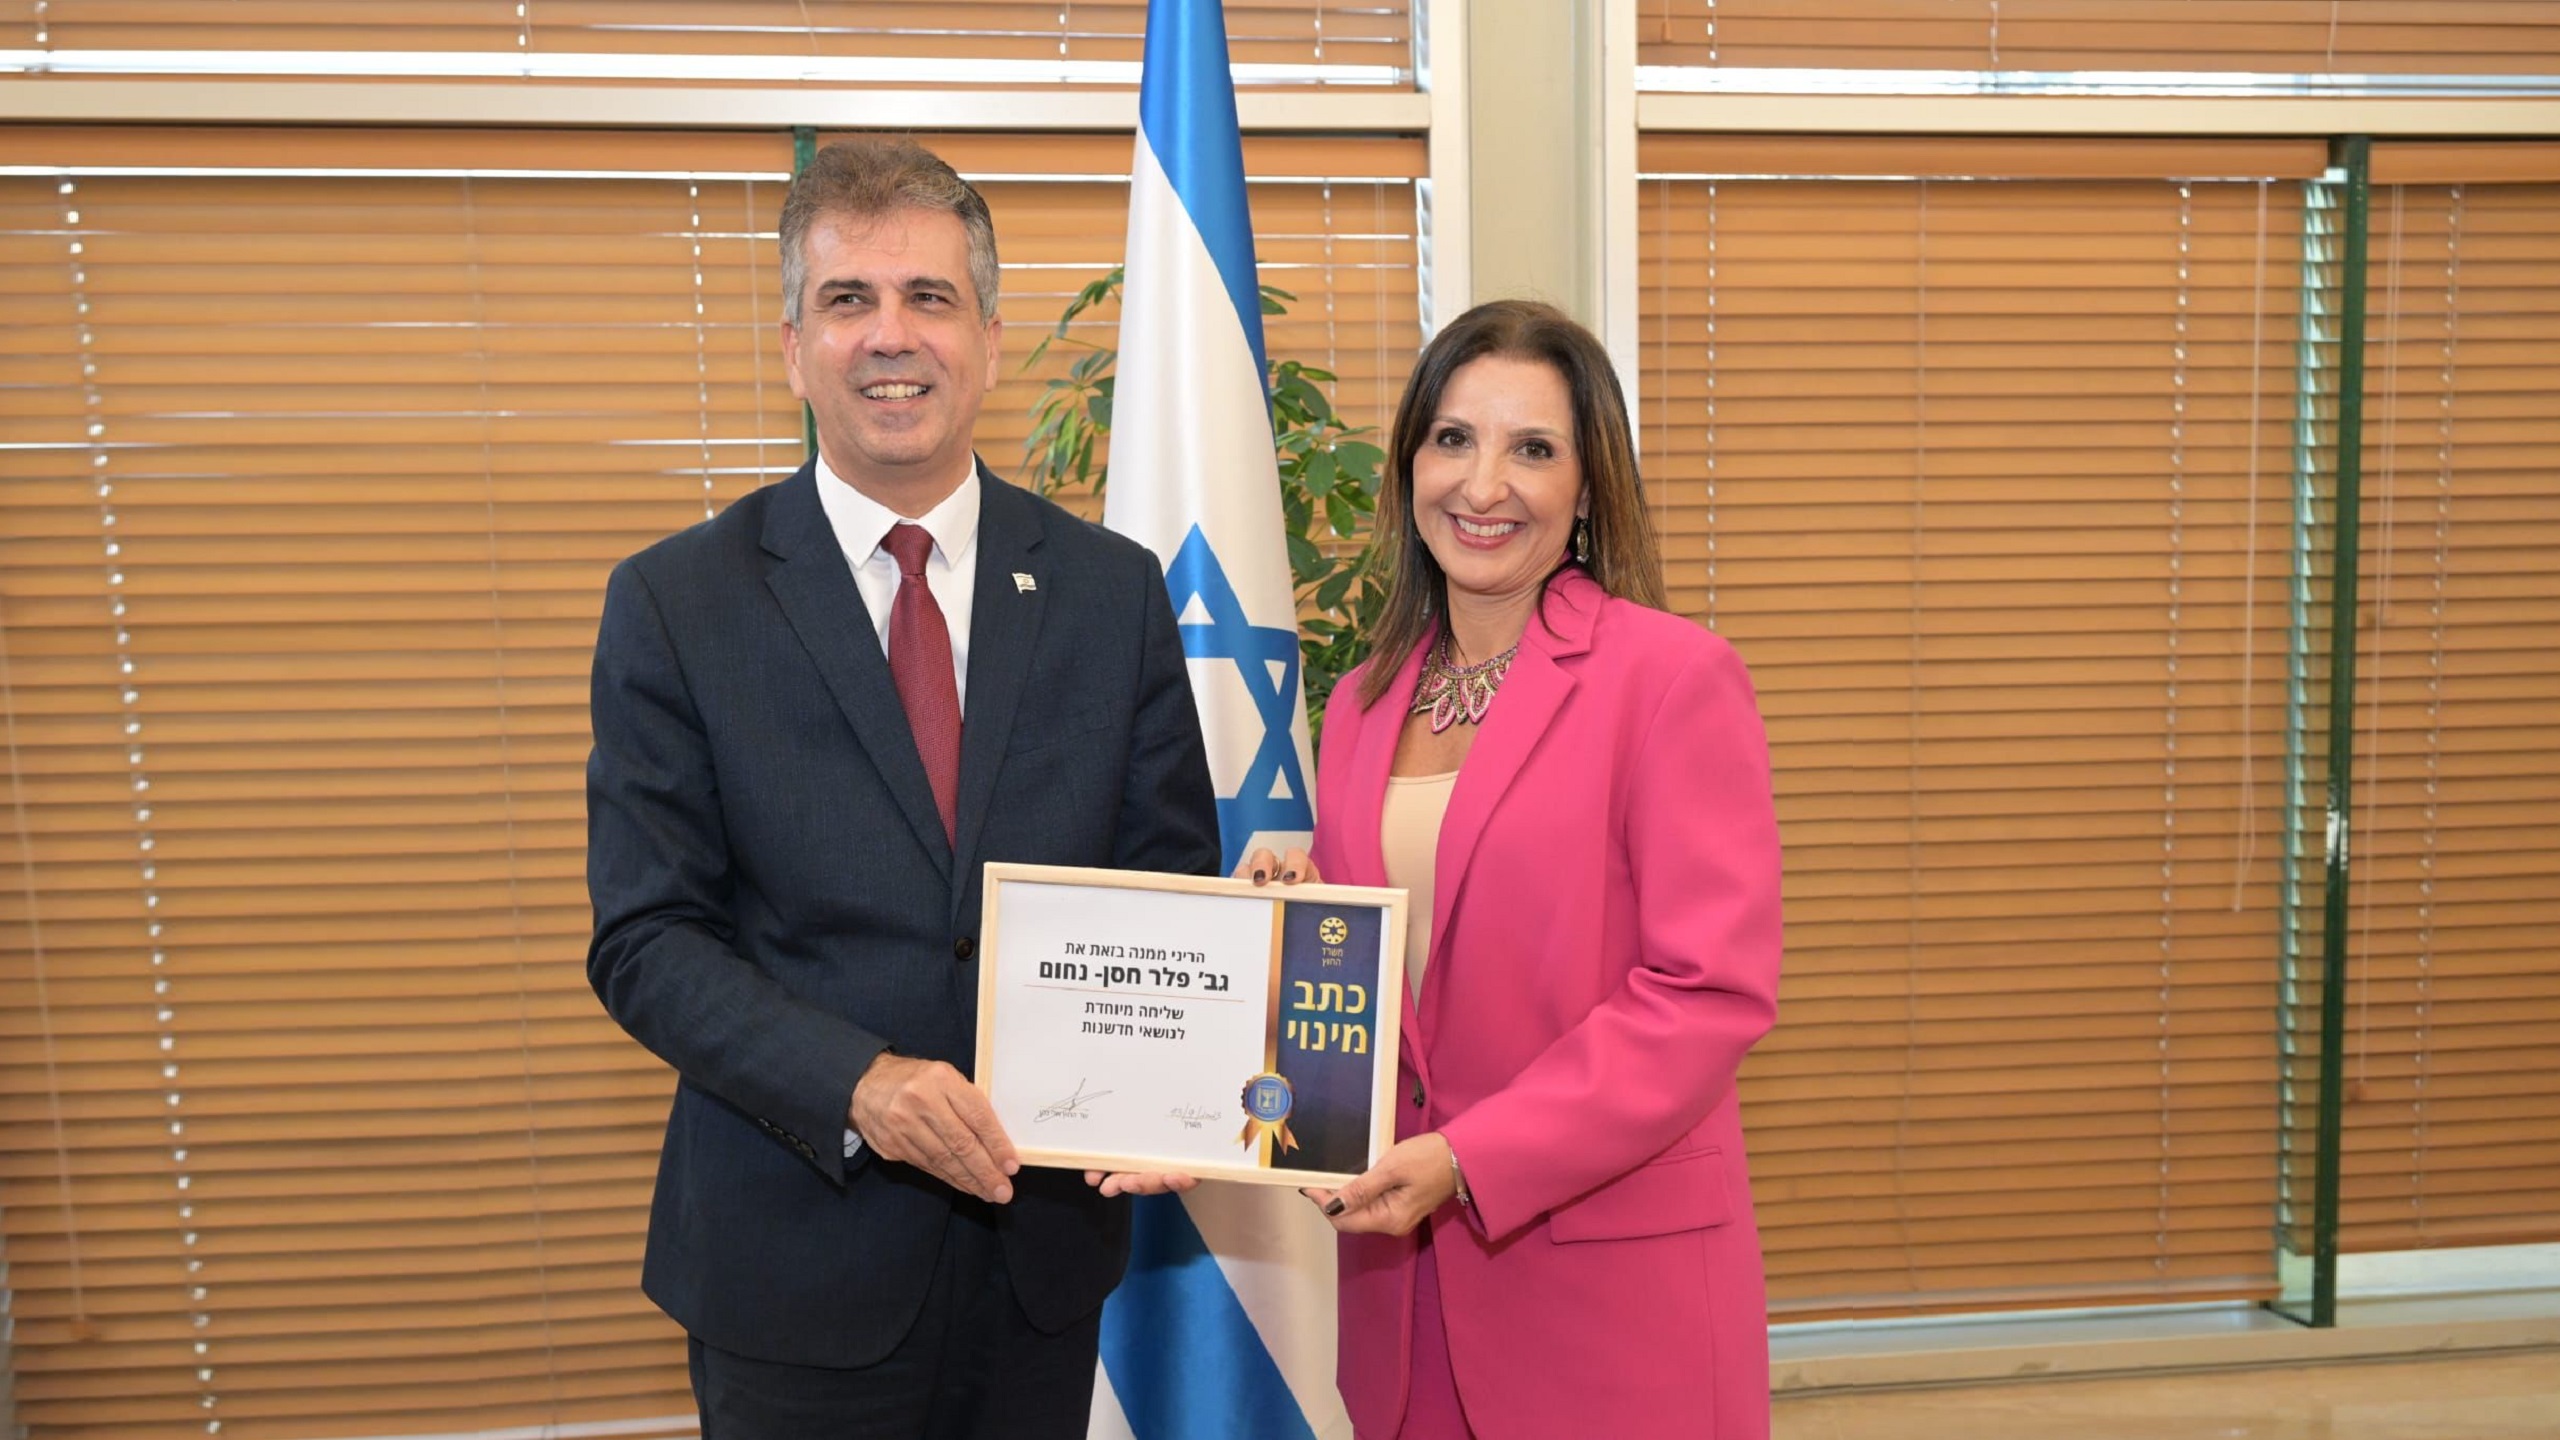 Fleur Hassan-Nahoum Named Israel’s First Special Envoy for Innovation